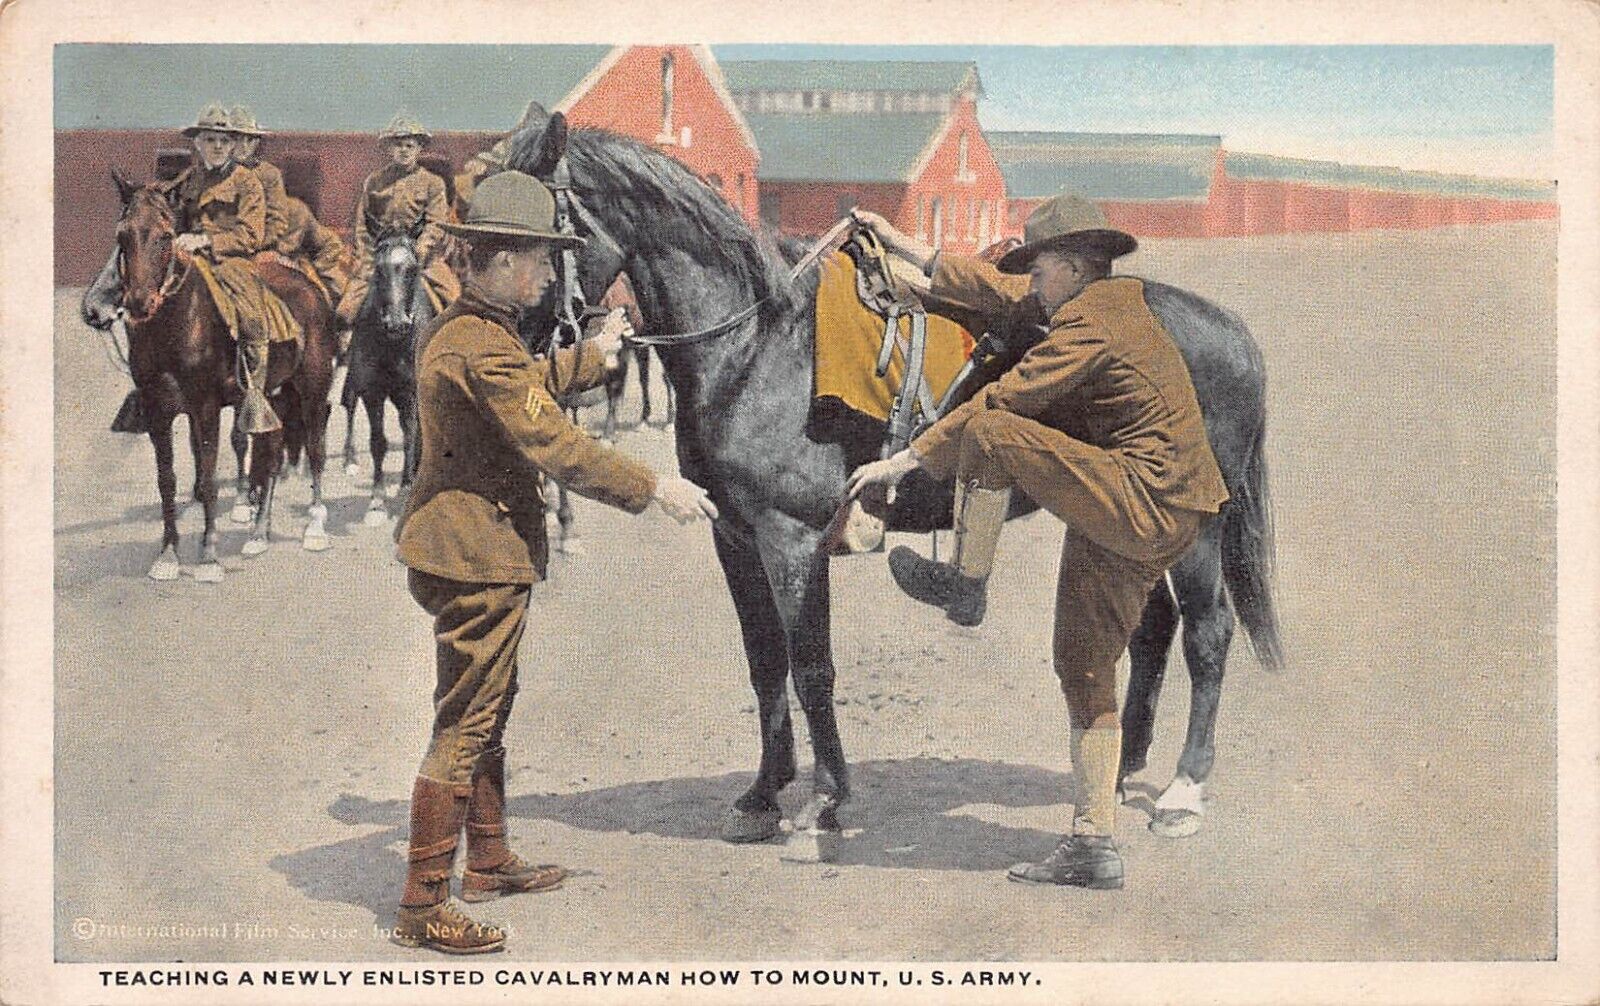 U.S. Army: Teaching a Newly Enlisted Cavalryman How to Mount, Early Postcard